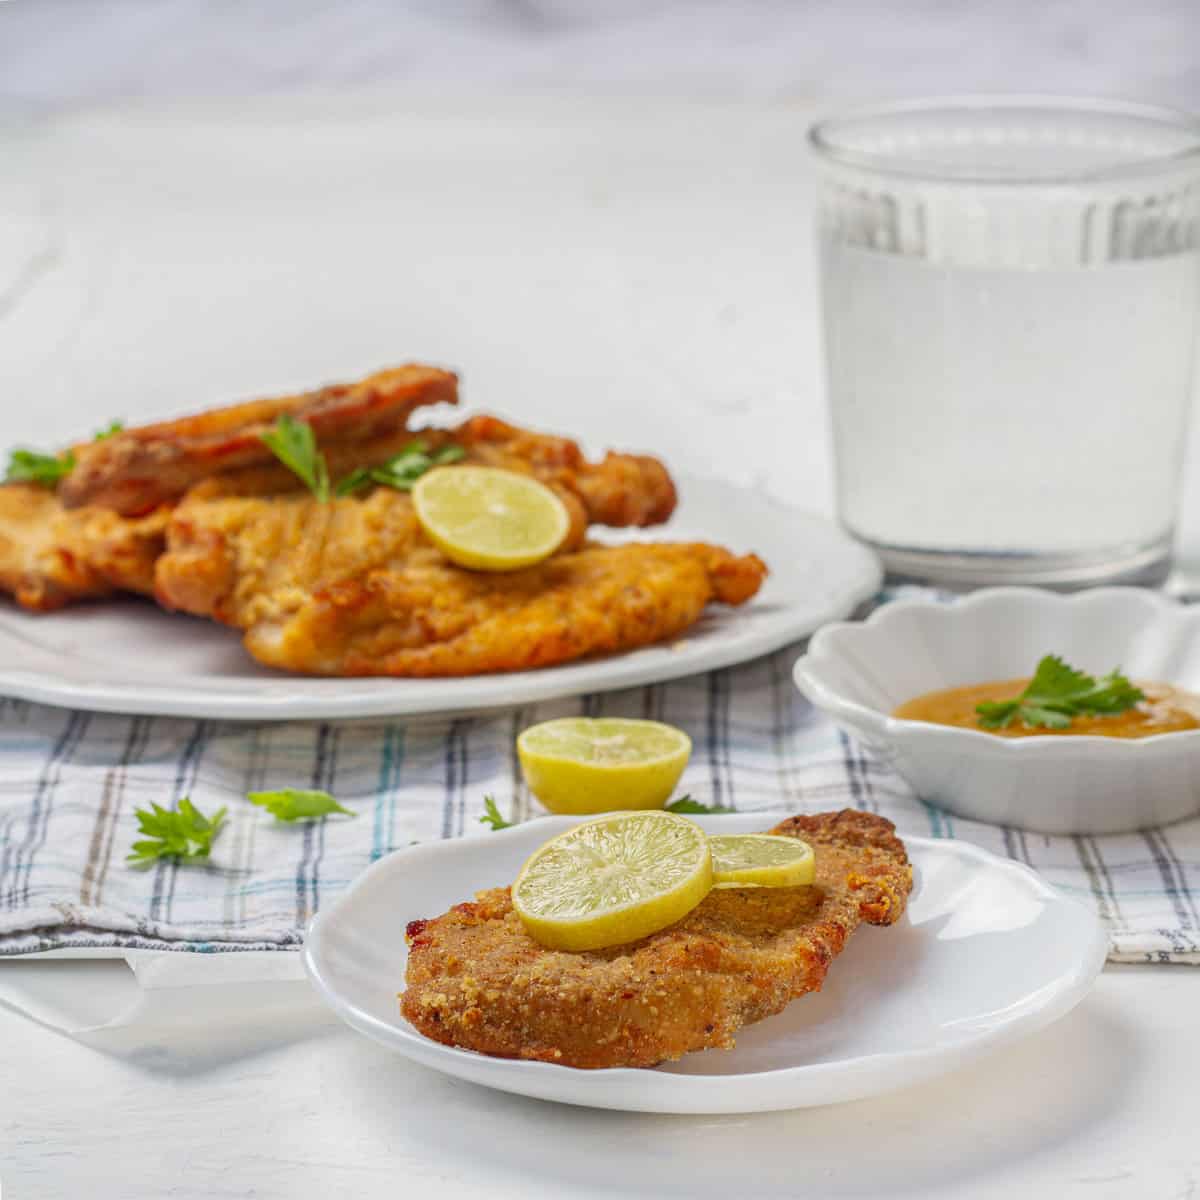 Crispy air fryer chicken cutlets garnished with fresh herbs and lemon slices.